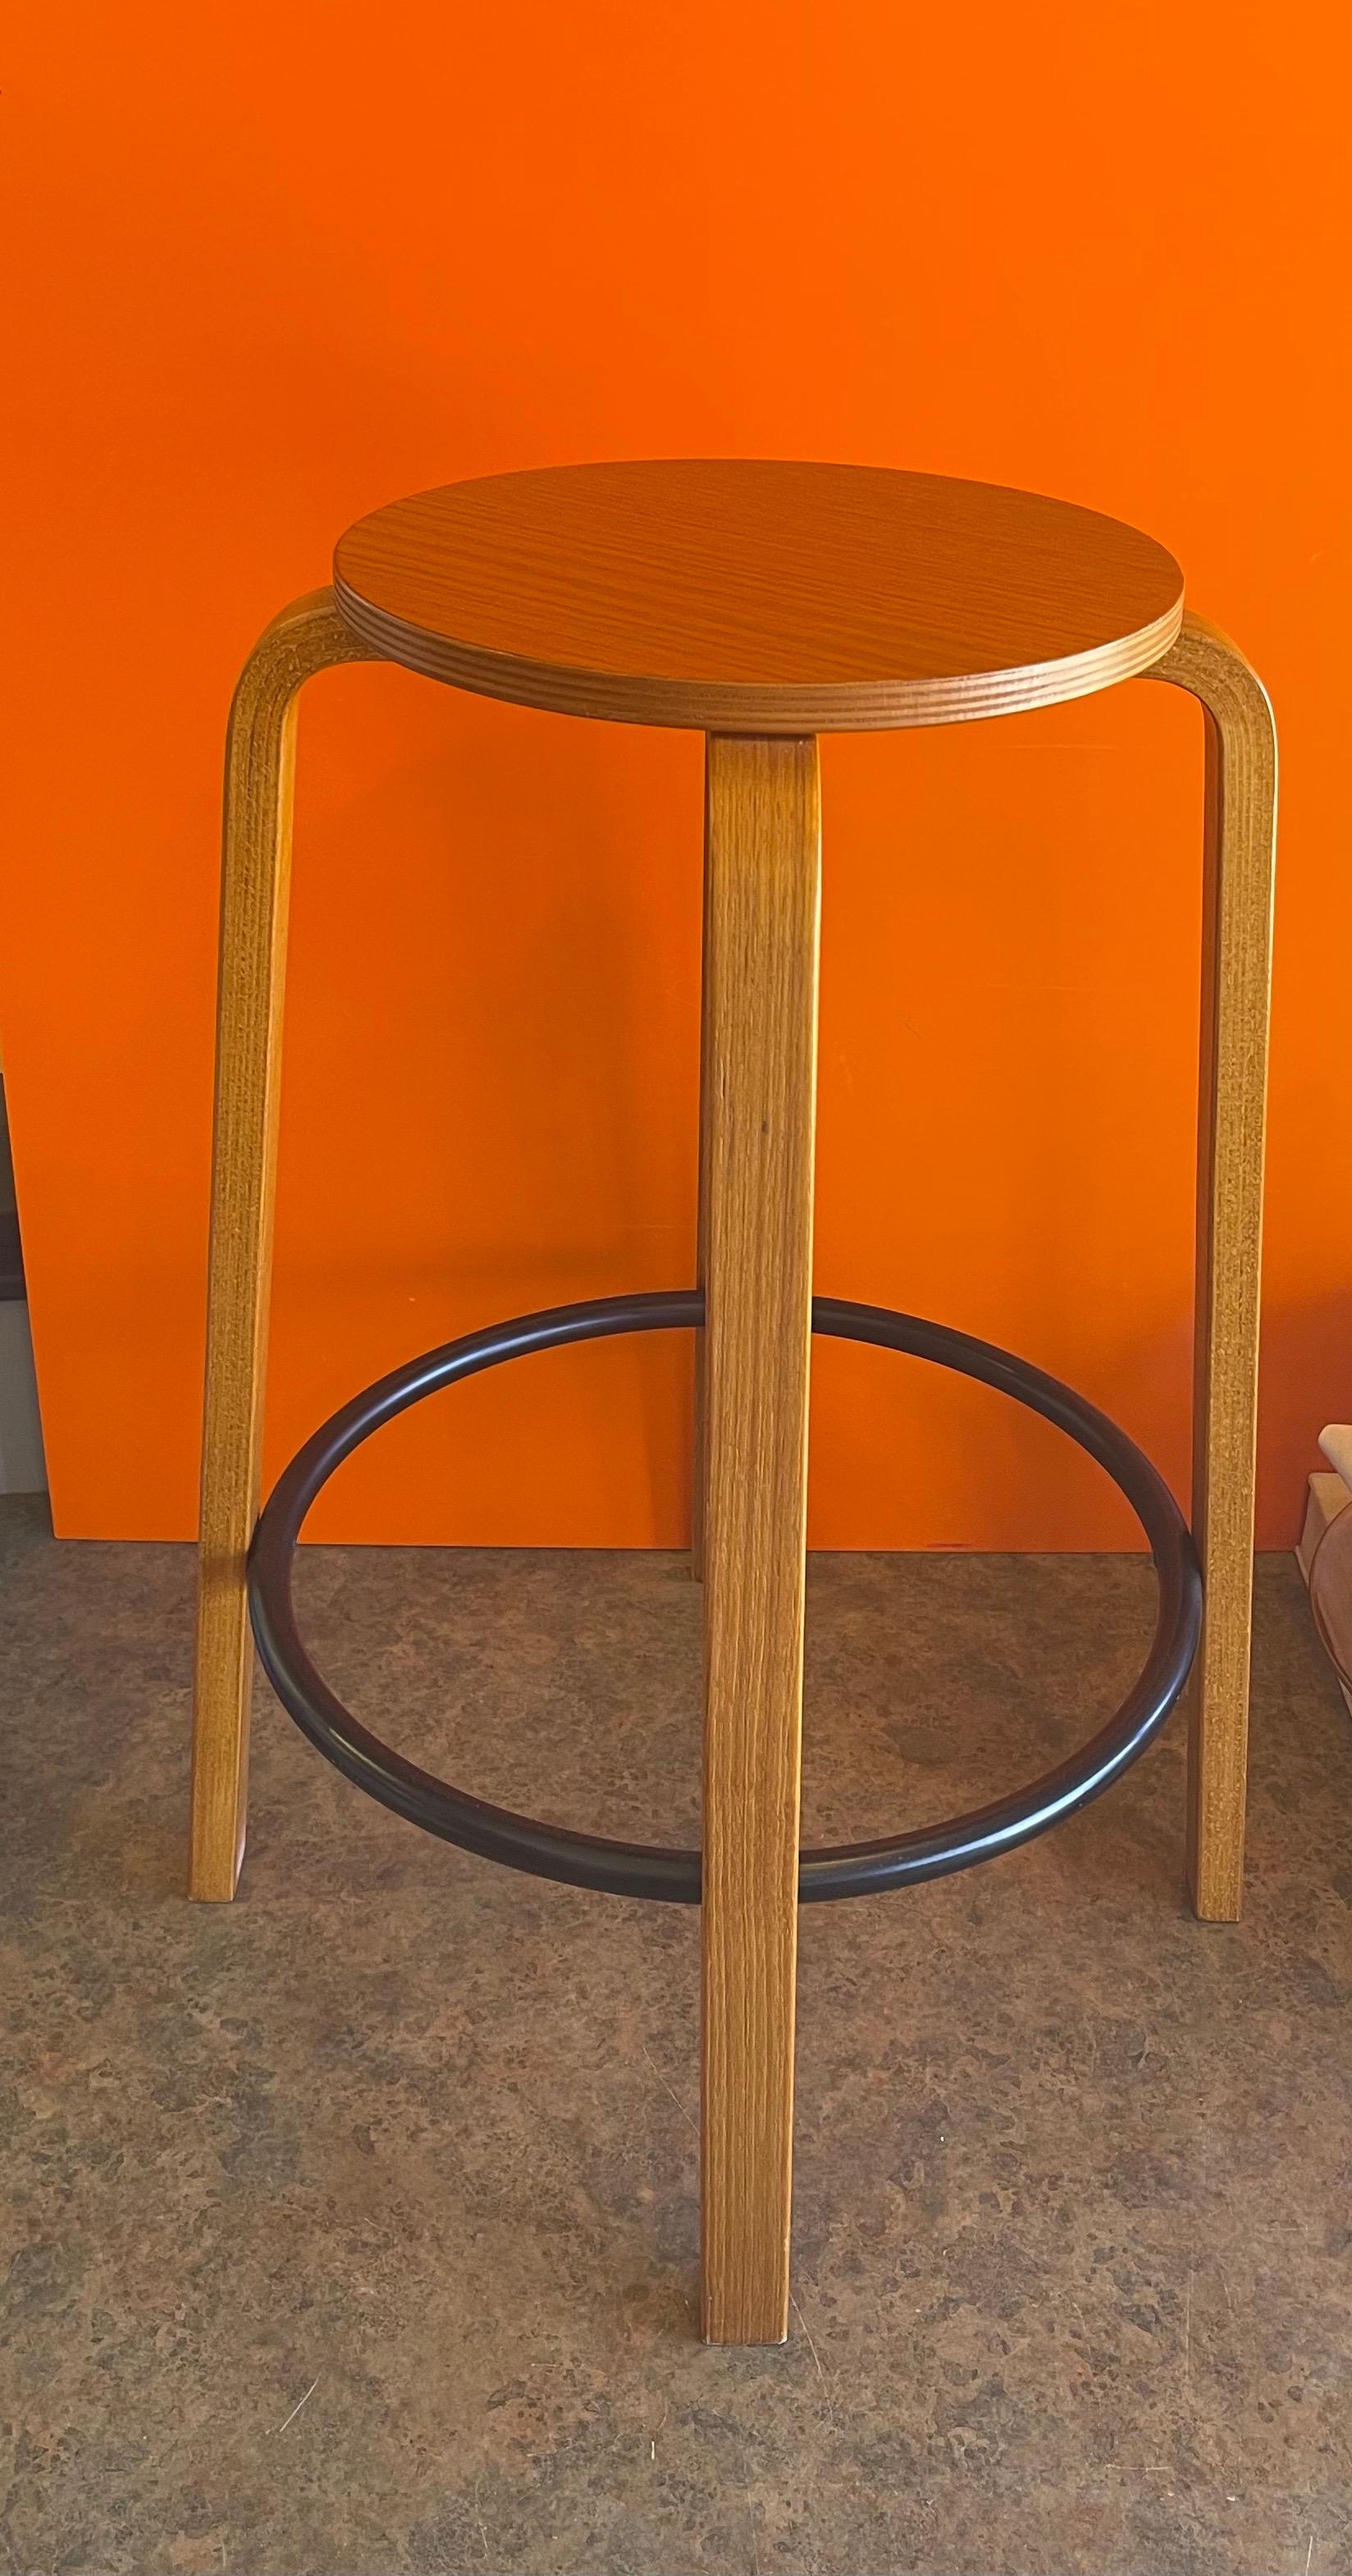 Danish modern teak footrest barstool, circa 1970s. The stool is in very good original condition and measures 20